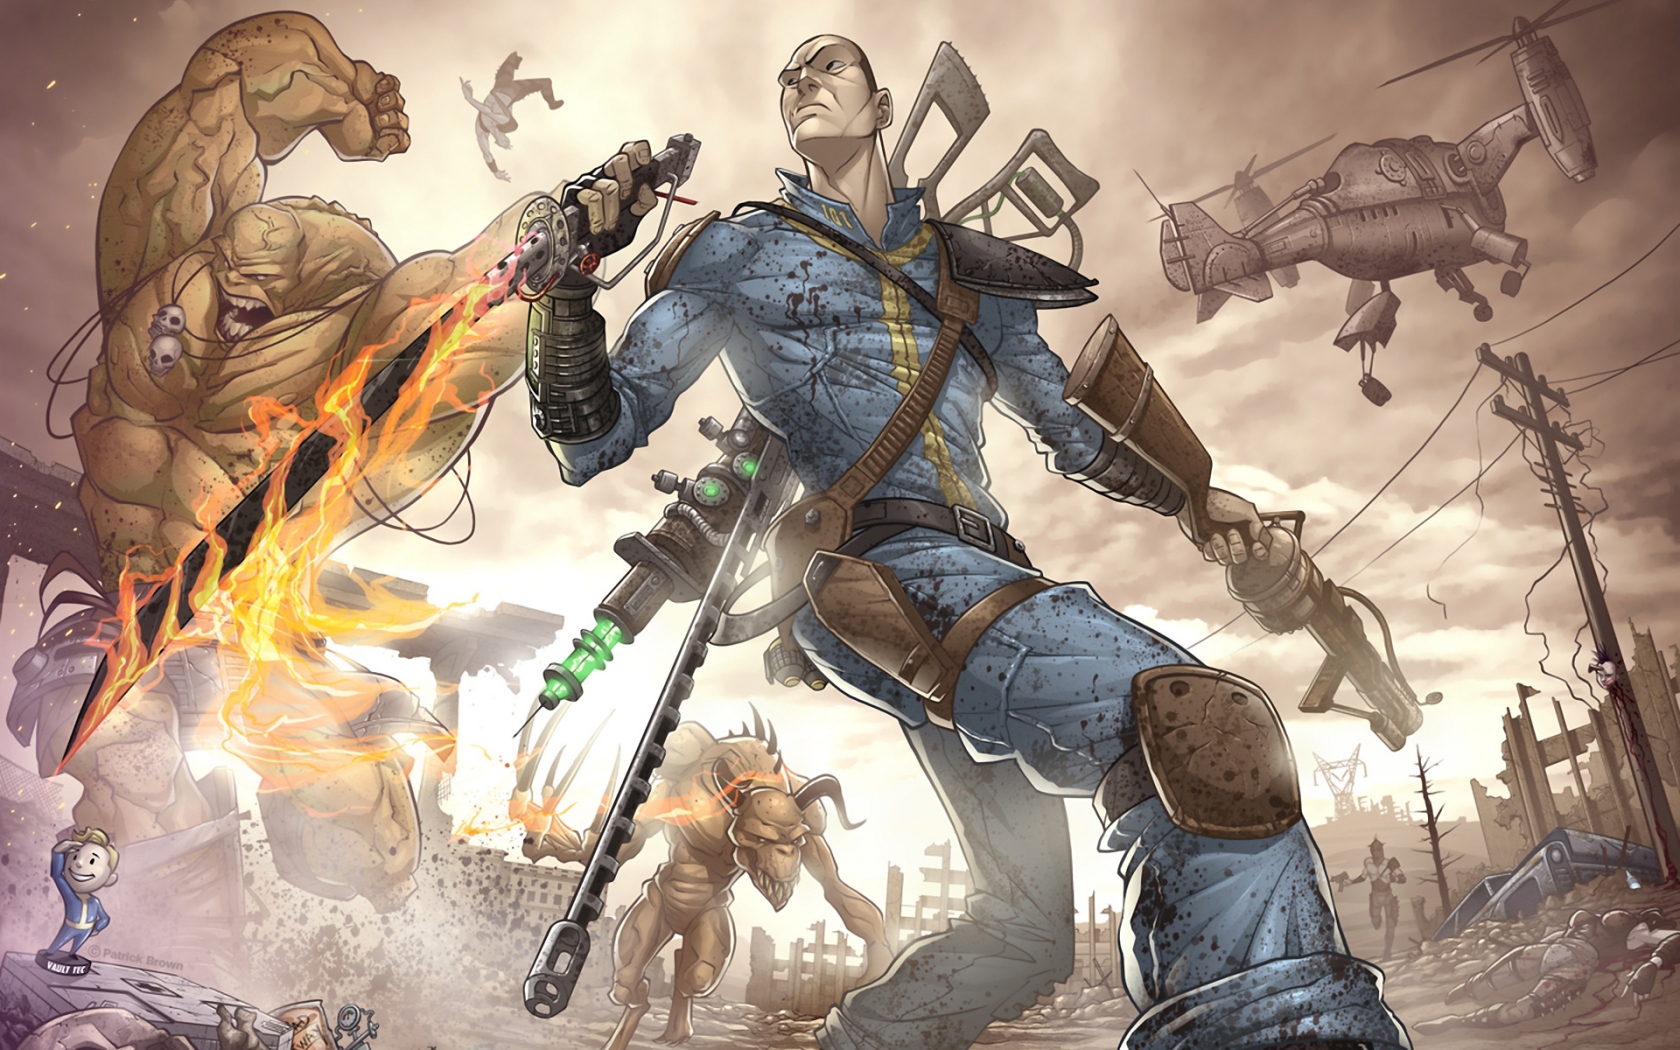 Fallout 3 Wallpaper 3 by Harty73 on DeviantArt